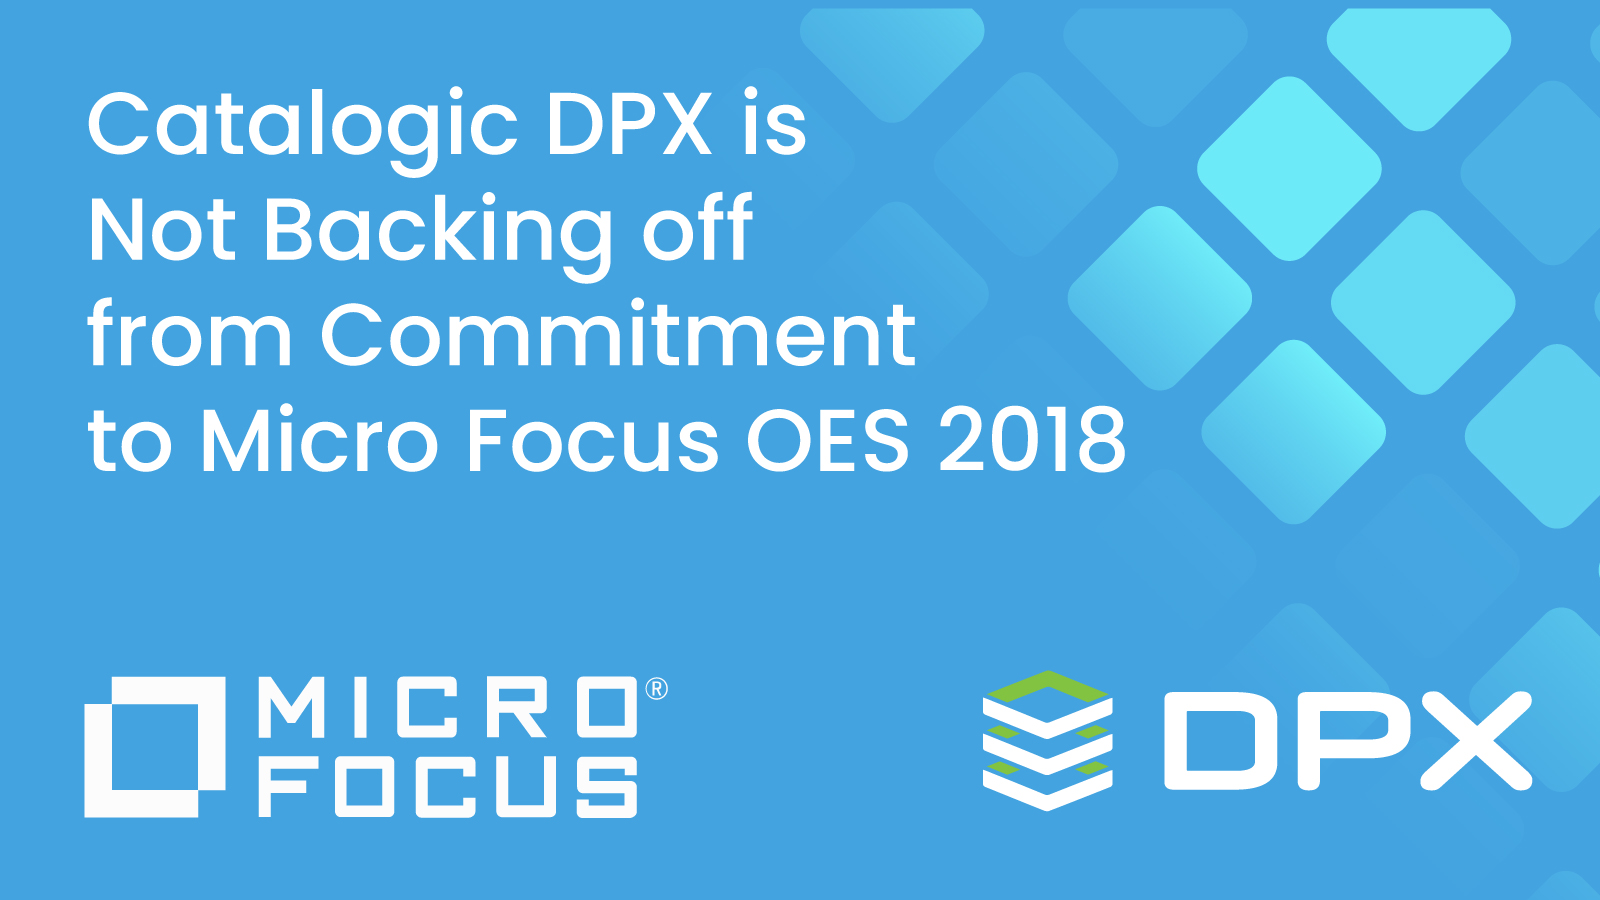 Catalogic DPX is Not Backing off from Commitment to Micro Focus OES 2018